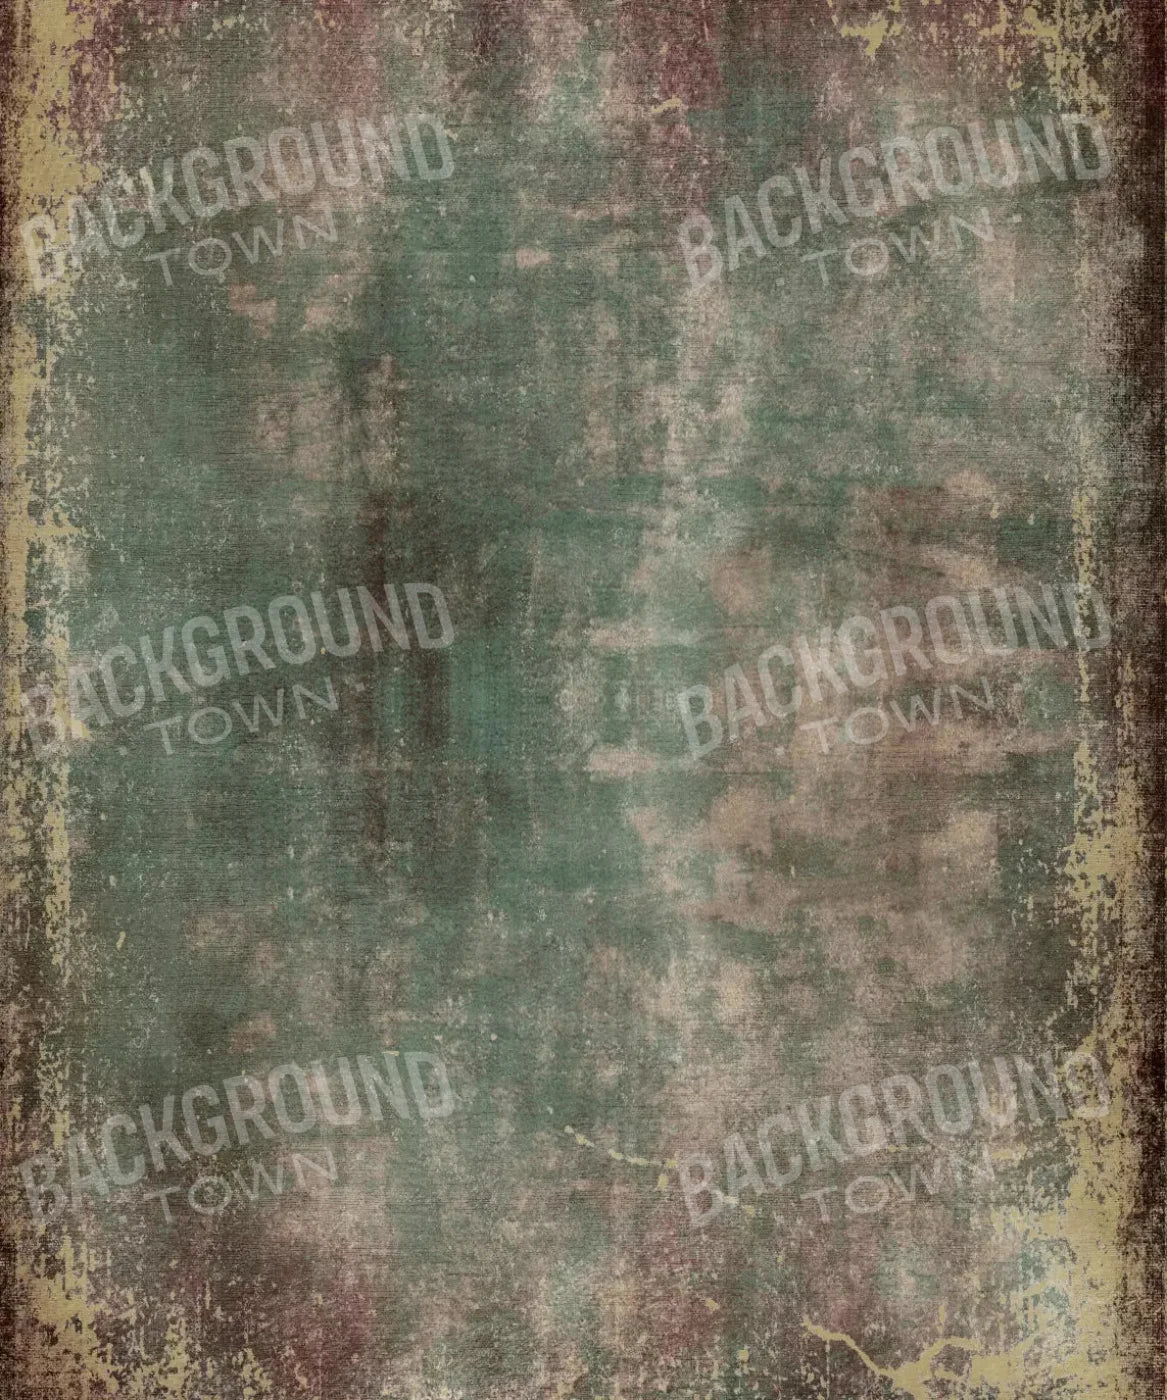 Green Urban Grunge Backdrop for Photography